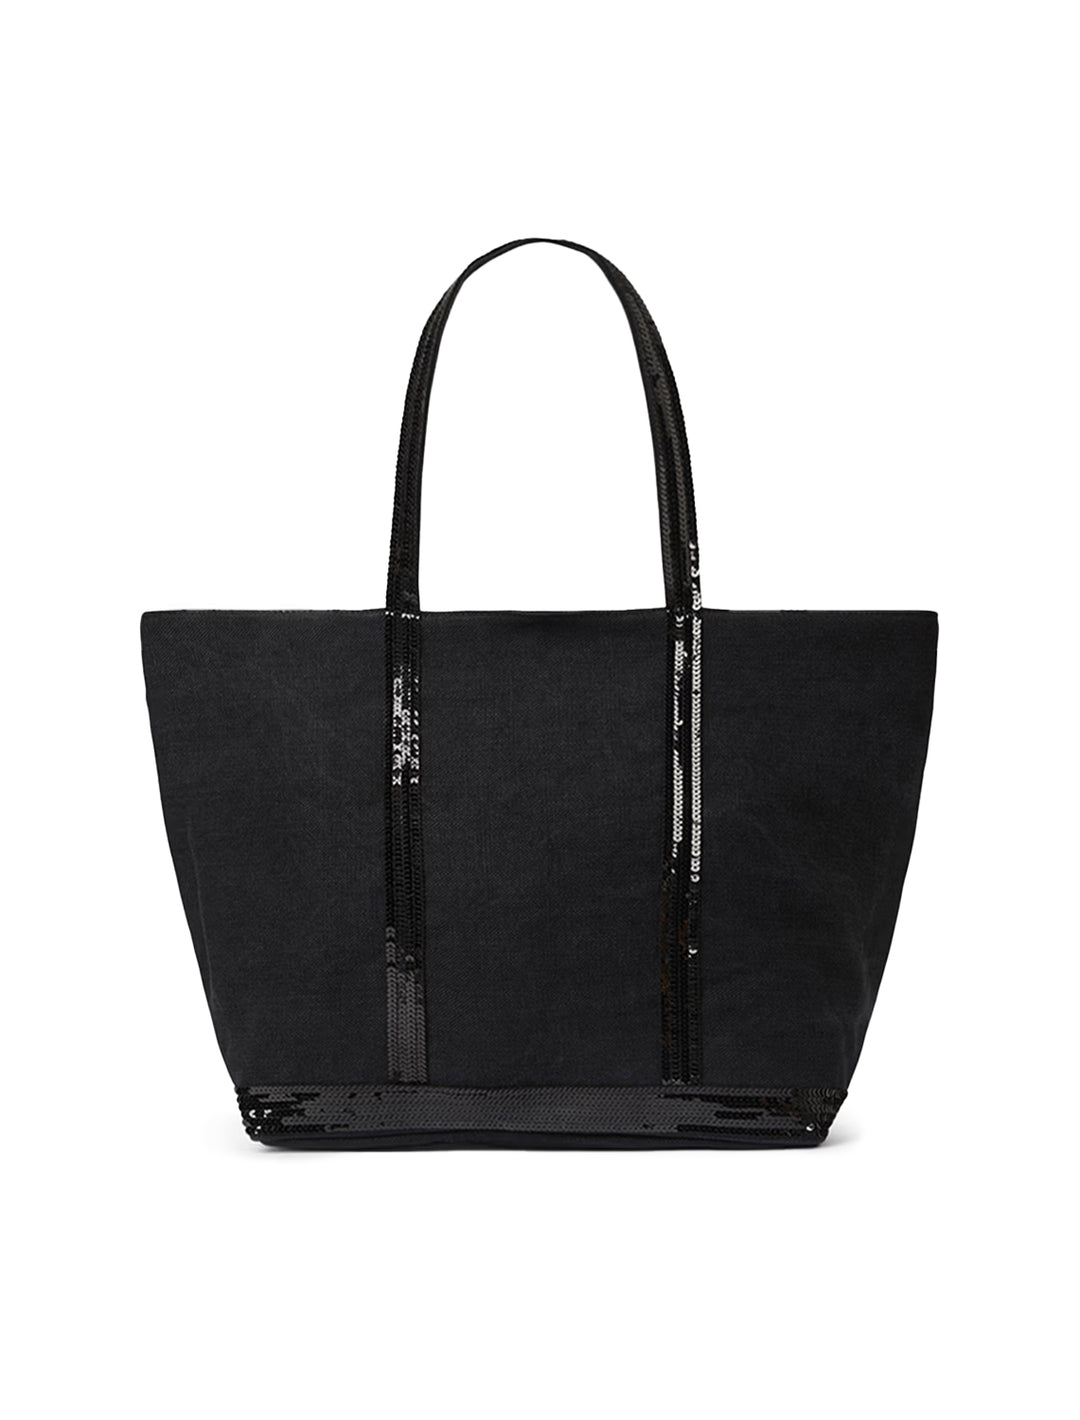 Front view of Vanessa Bruno's cabas l tote in noir.